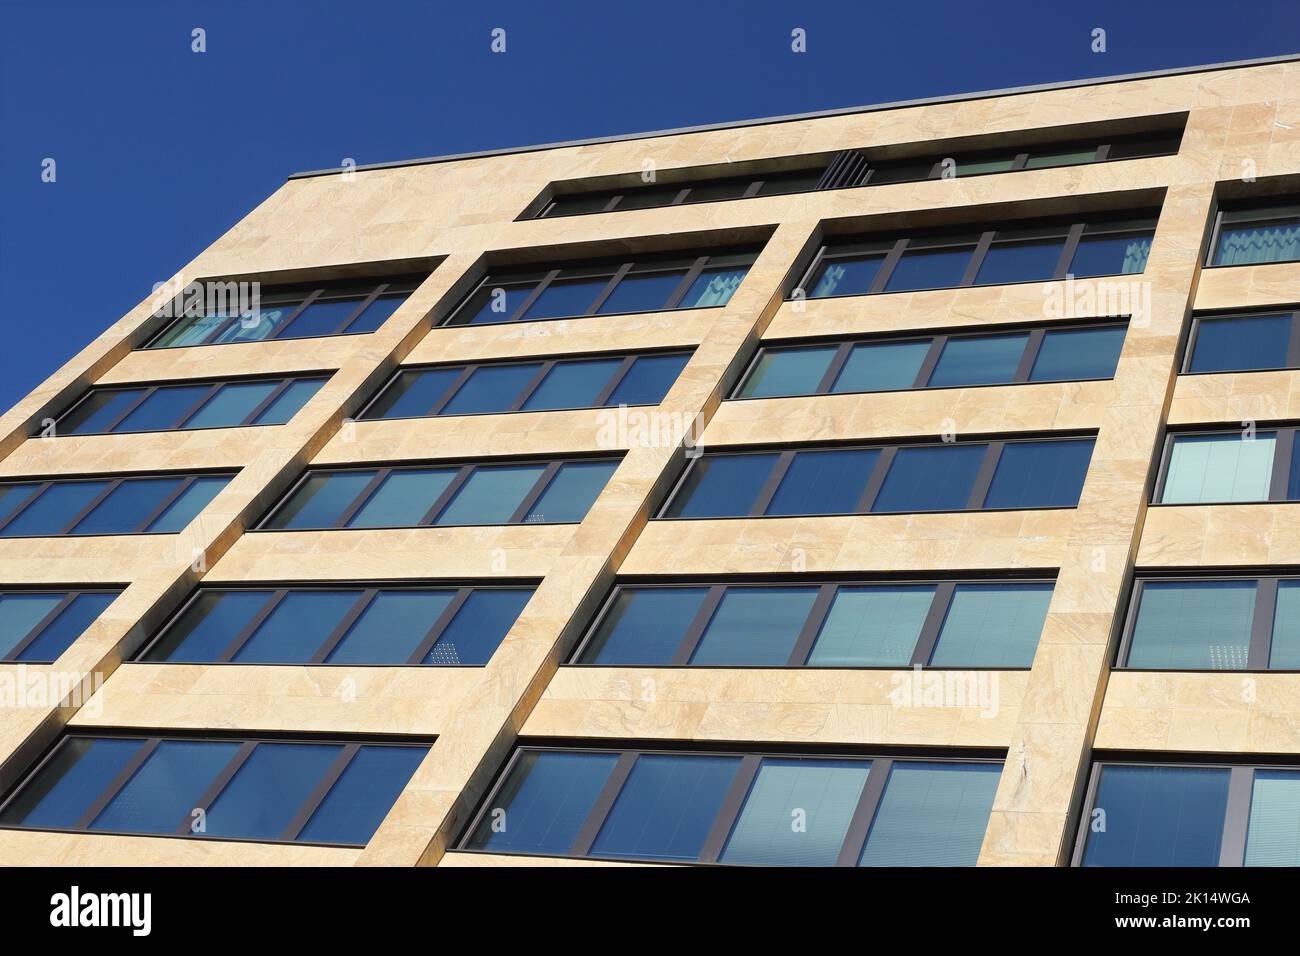 Detail view of an office building facade with windows seen from a low angle. Stock Photo